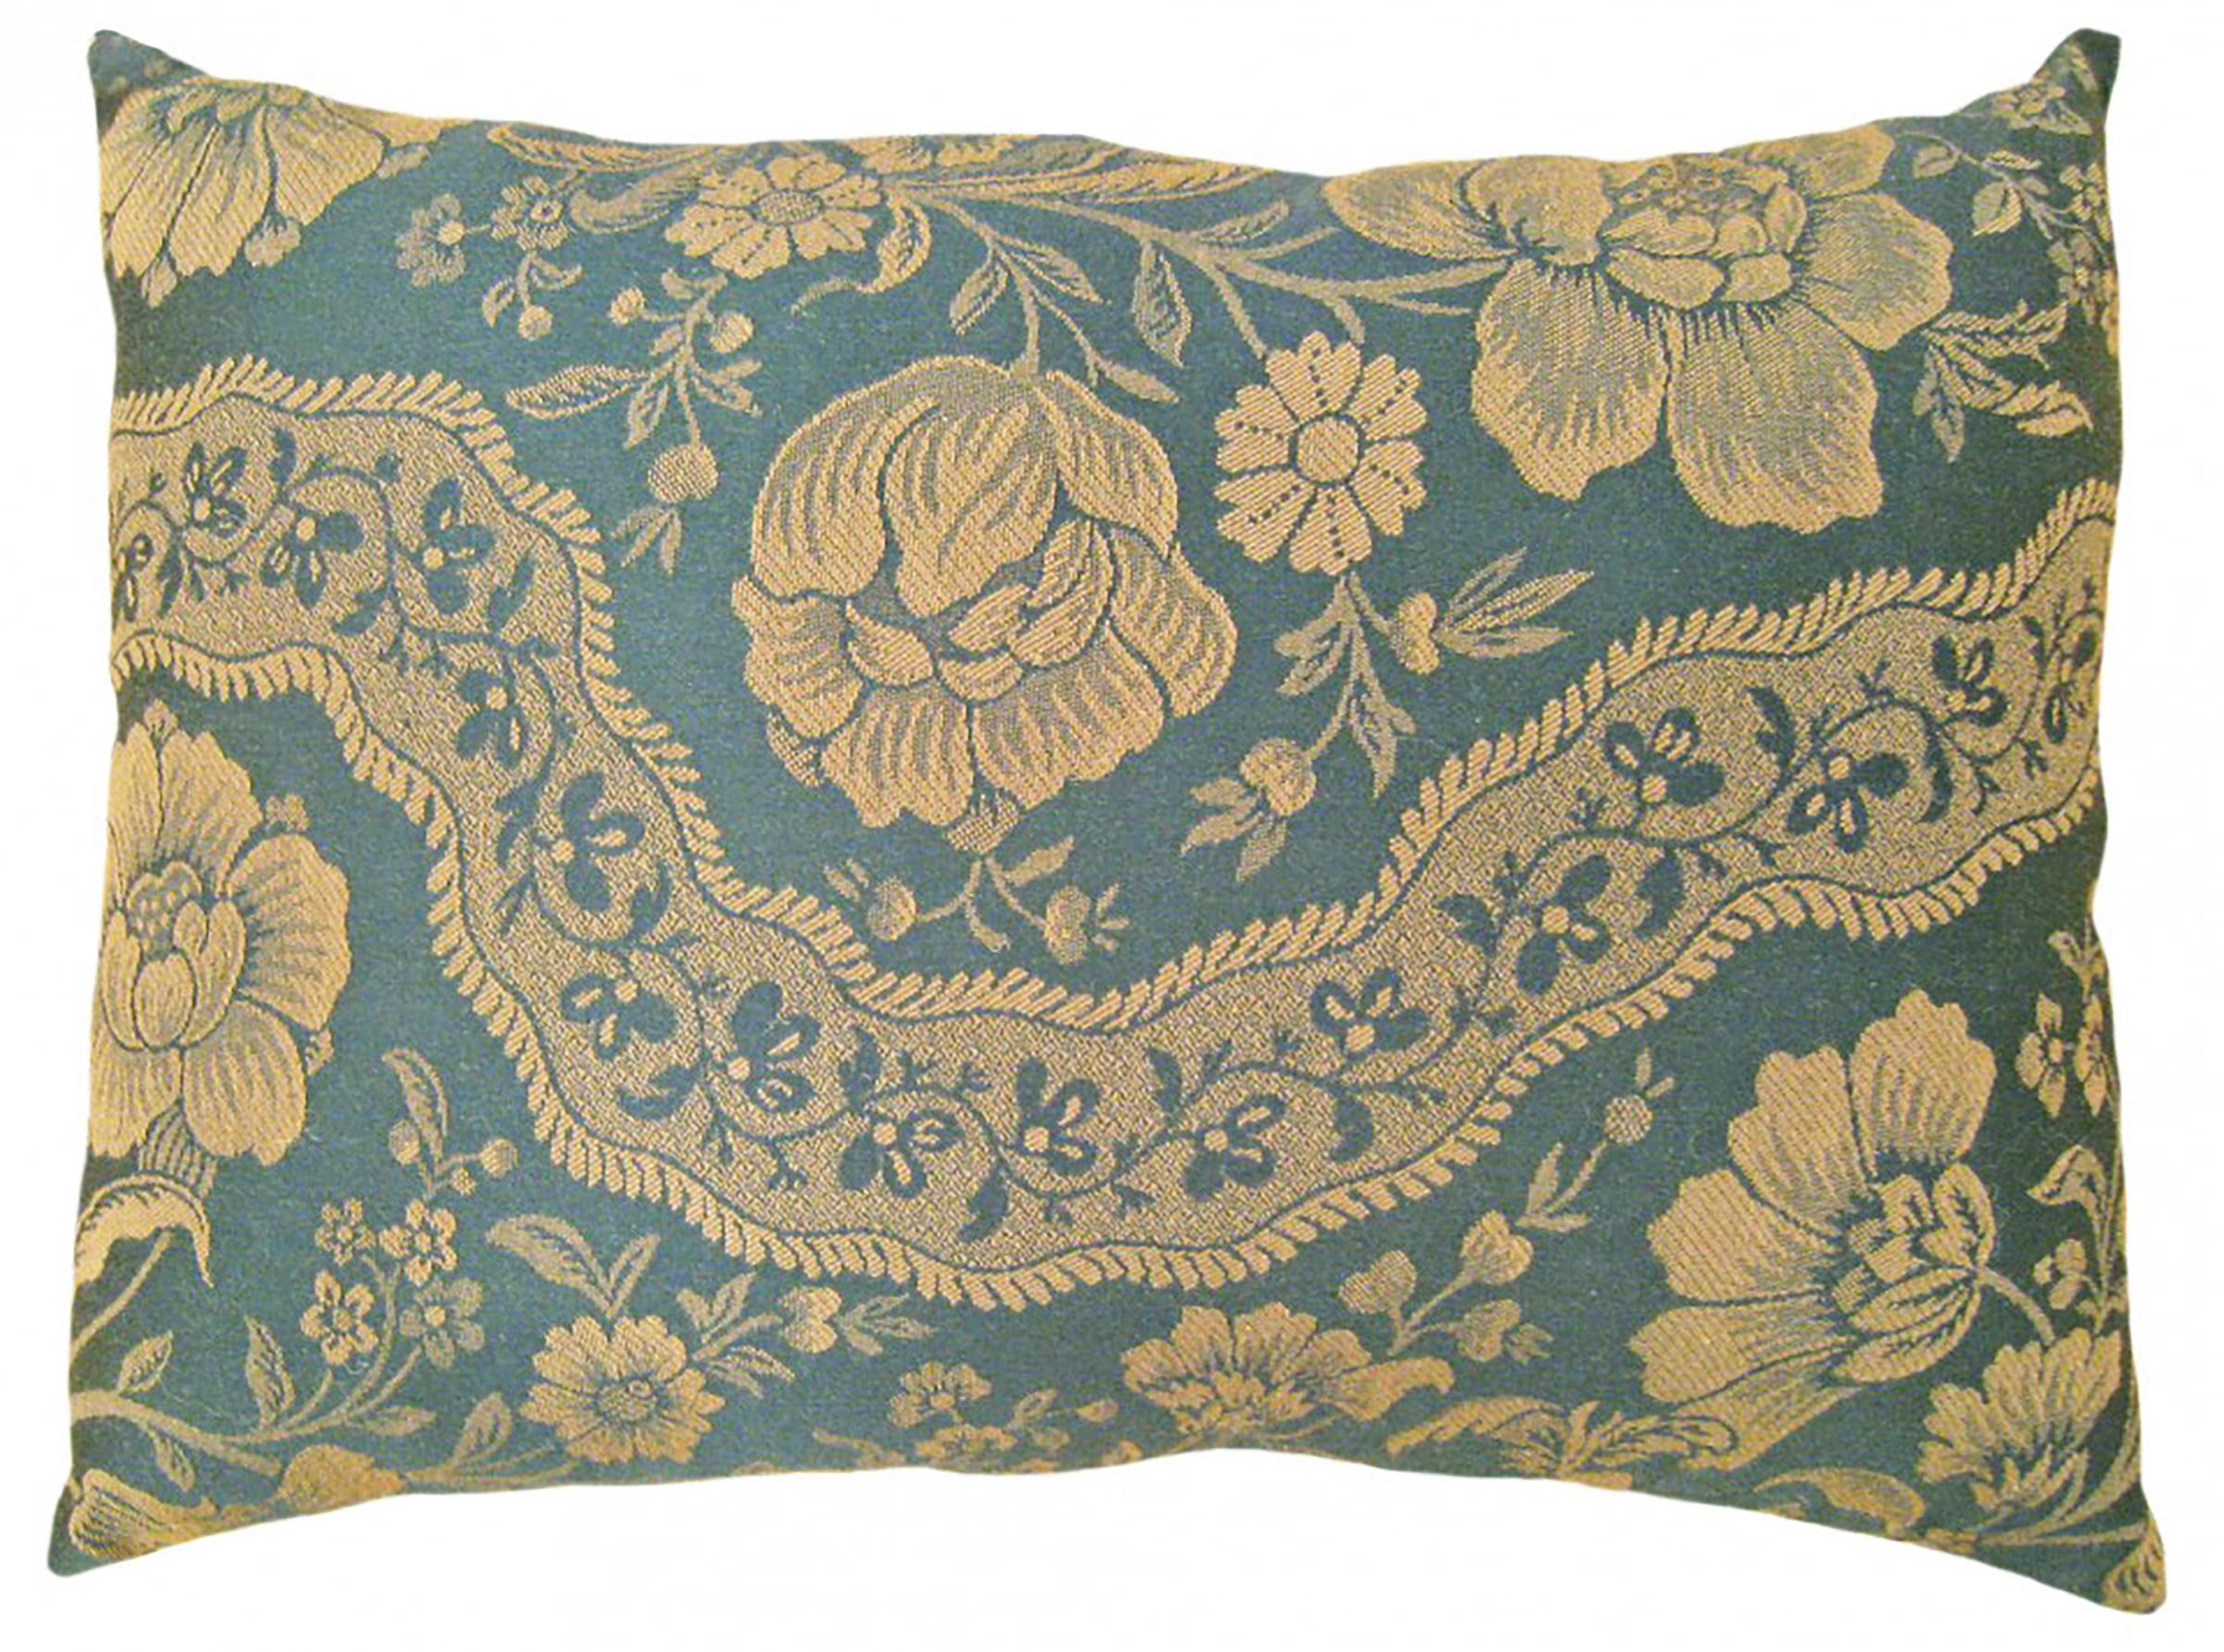 Pair of Decorative Vintage European Chinoiserie Fabric Pillows with Floral For Sale 2